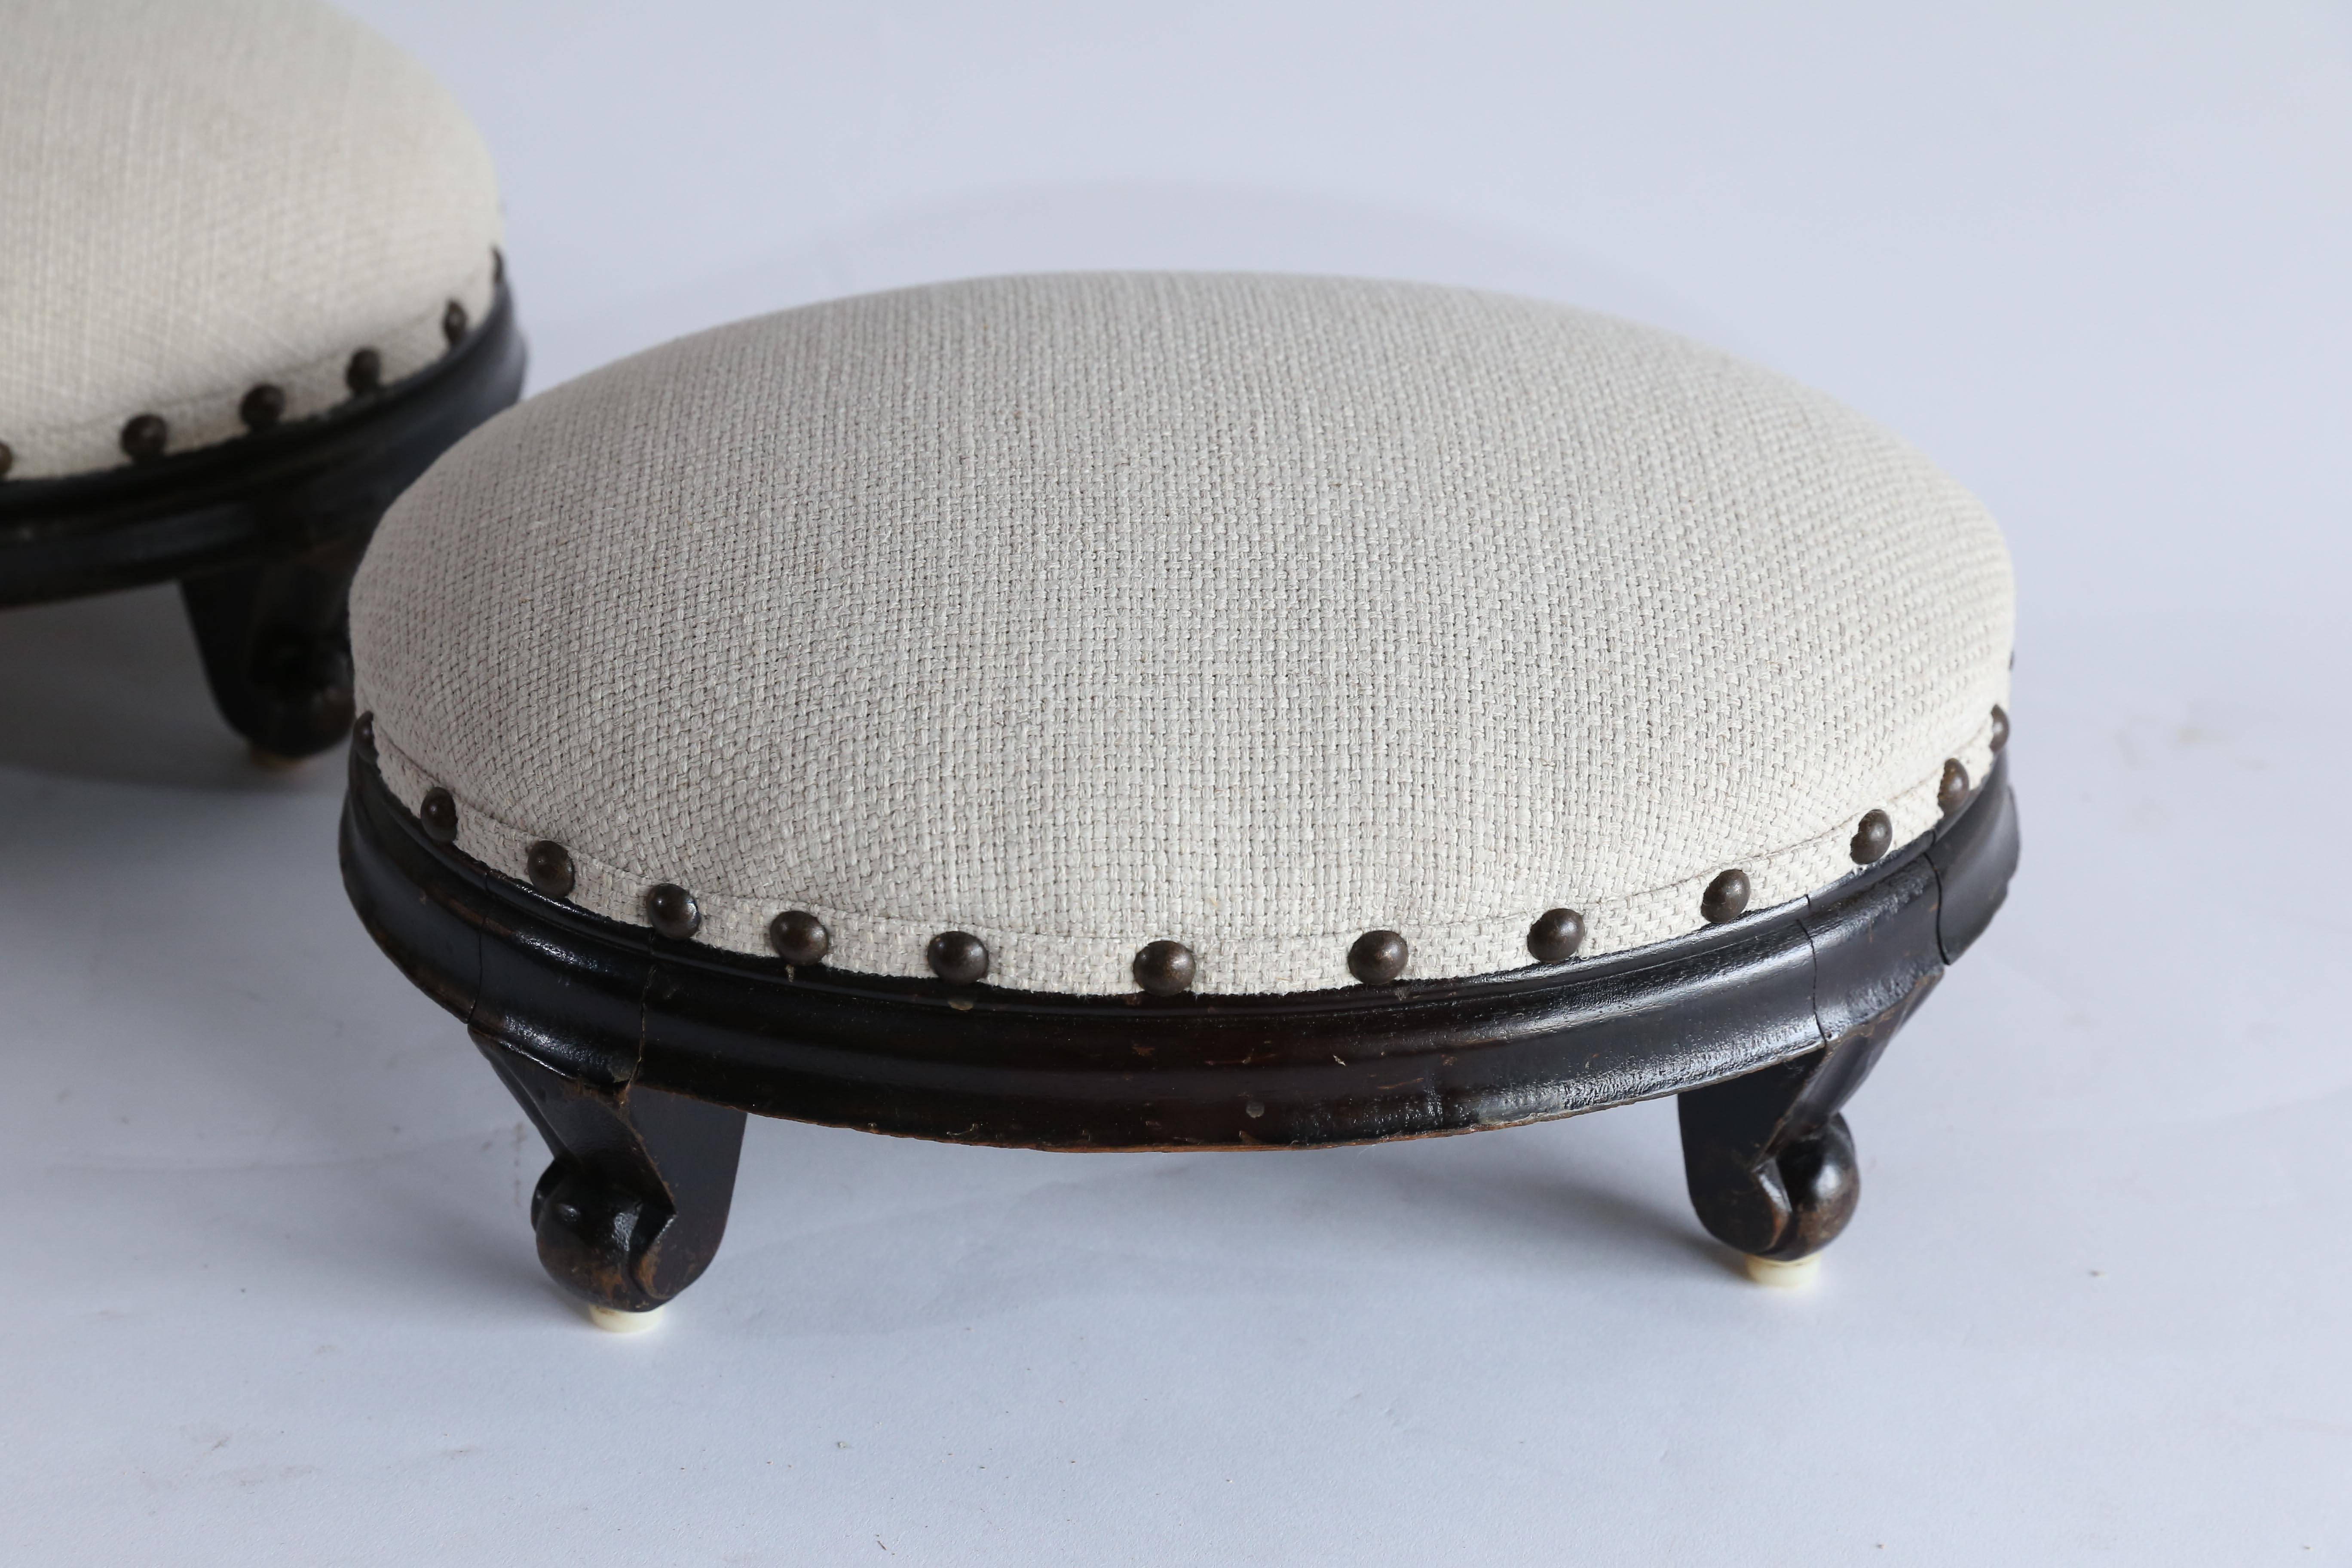 A lovely little oval foot stool of dark wood with scroll feet found in France. Newly upholstered in a cream linen blend enhanced with brass nail heads.
Sold separately, two available.